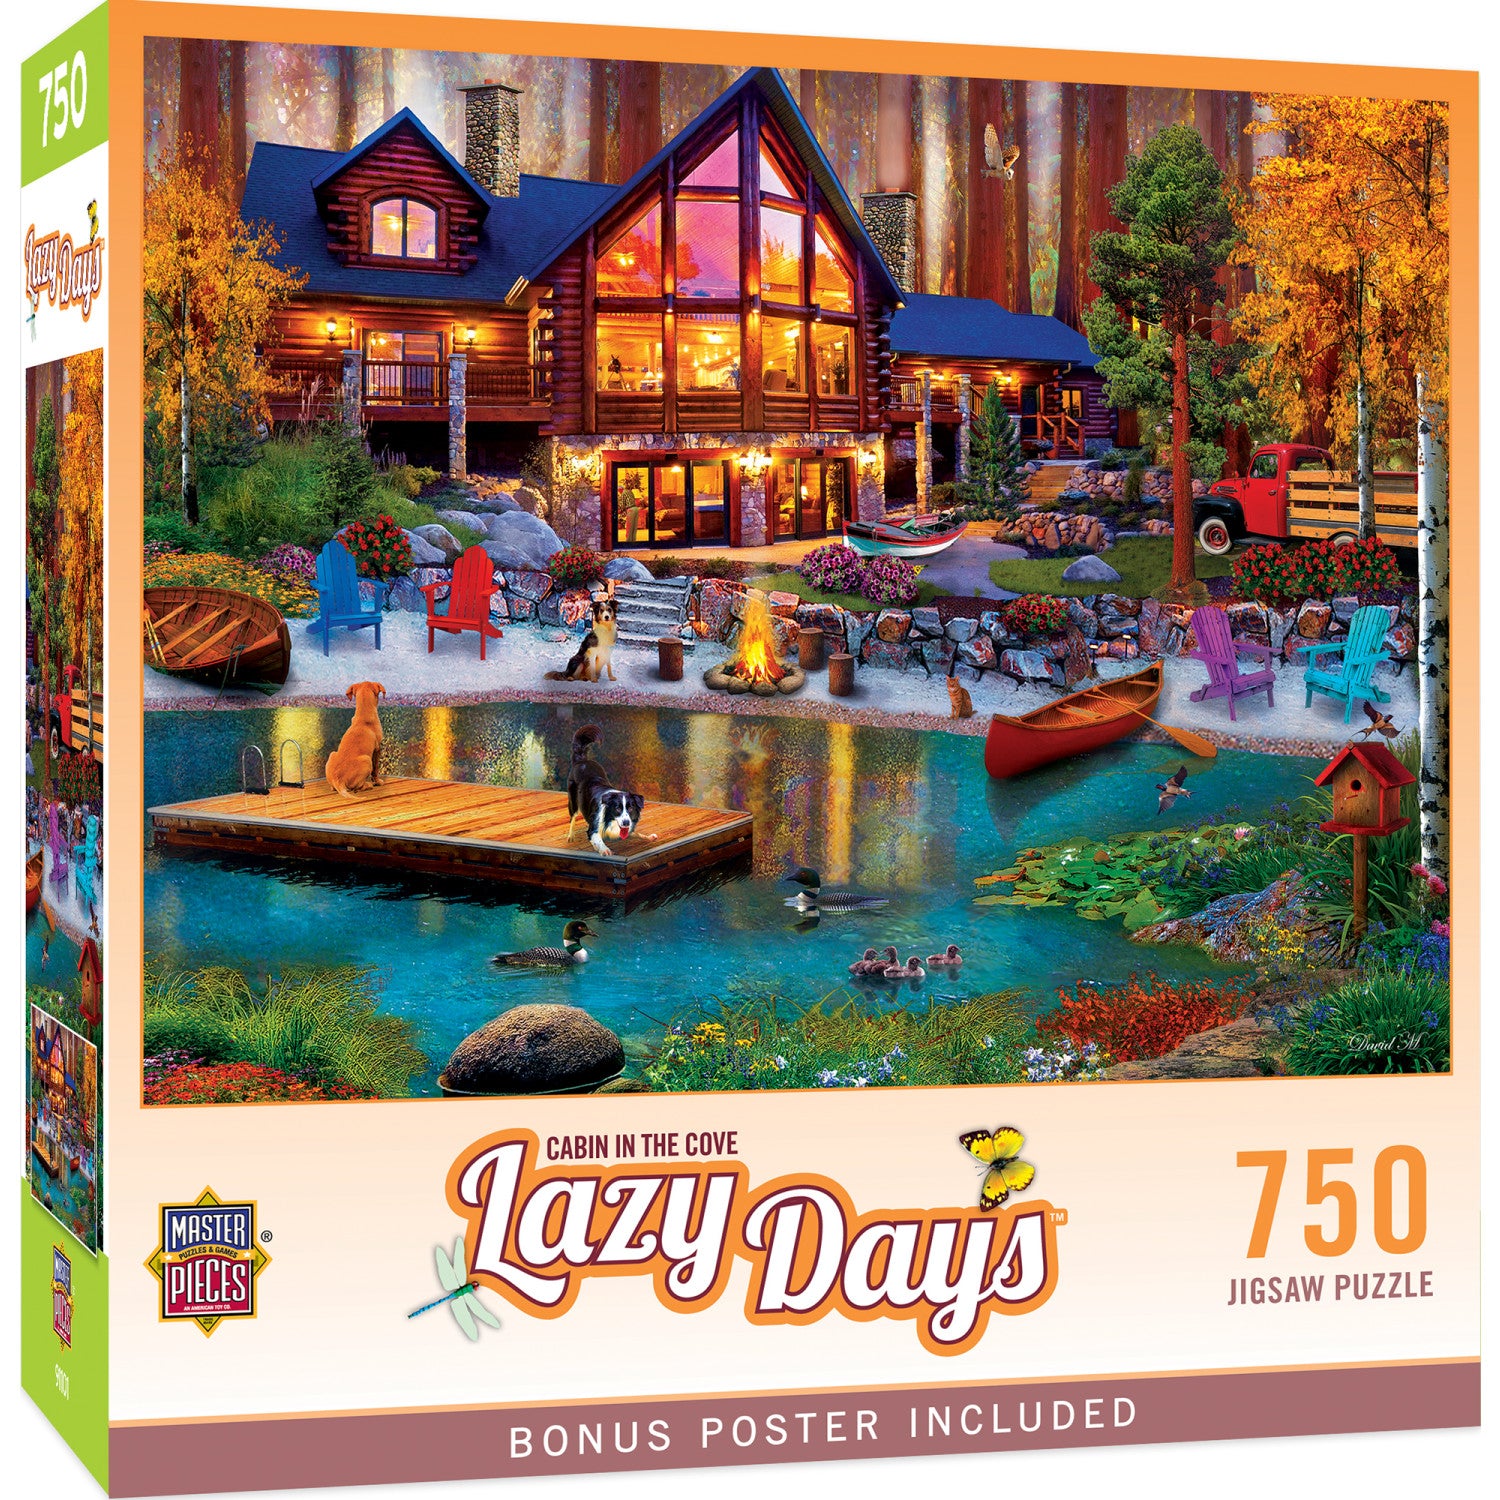 Lazy Days - Cabin in the Cove 750 Piece Jigsaw Puzzle